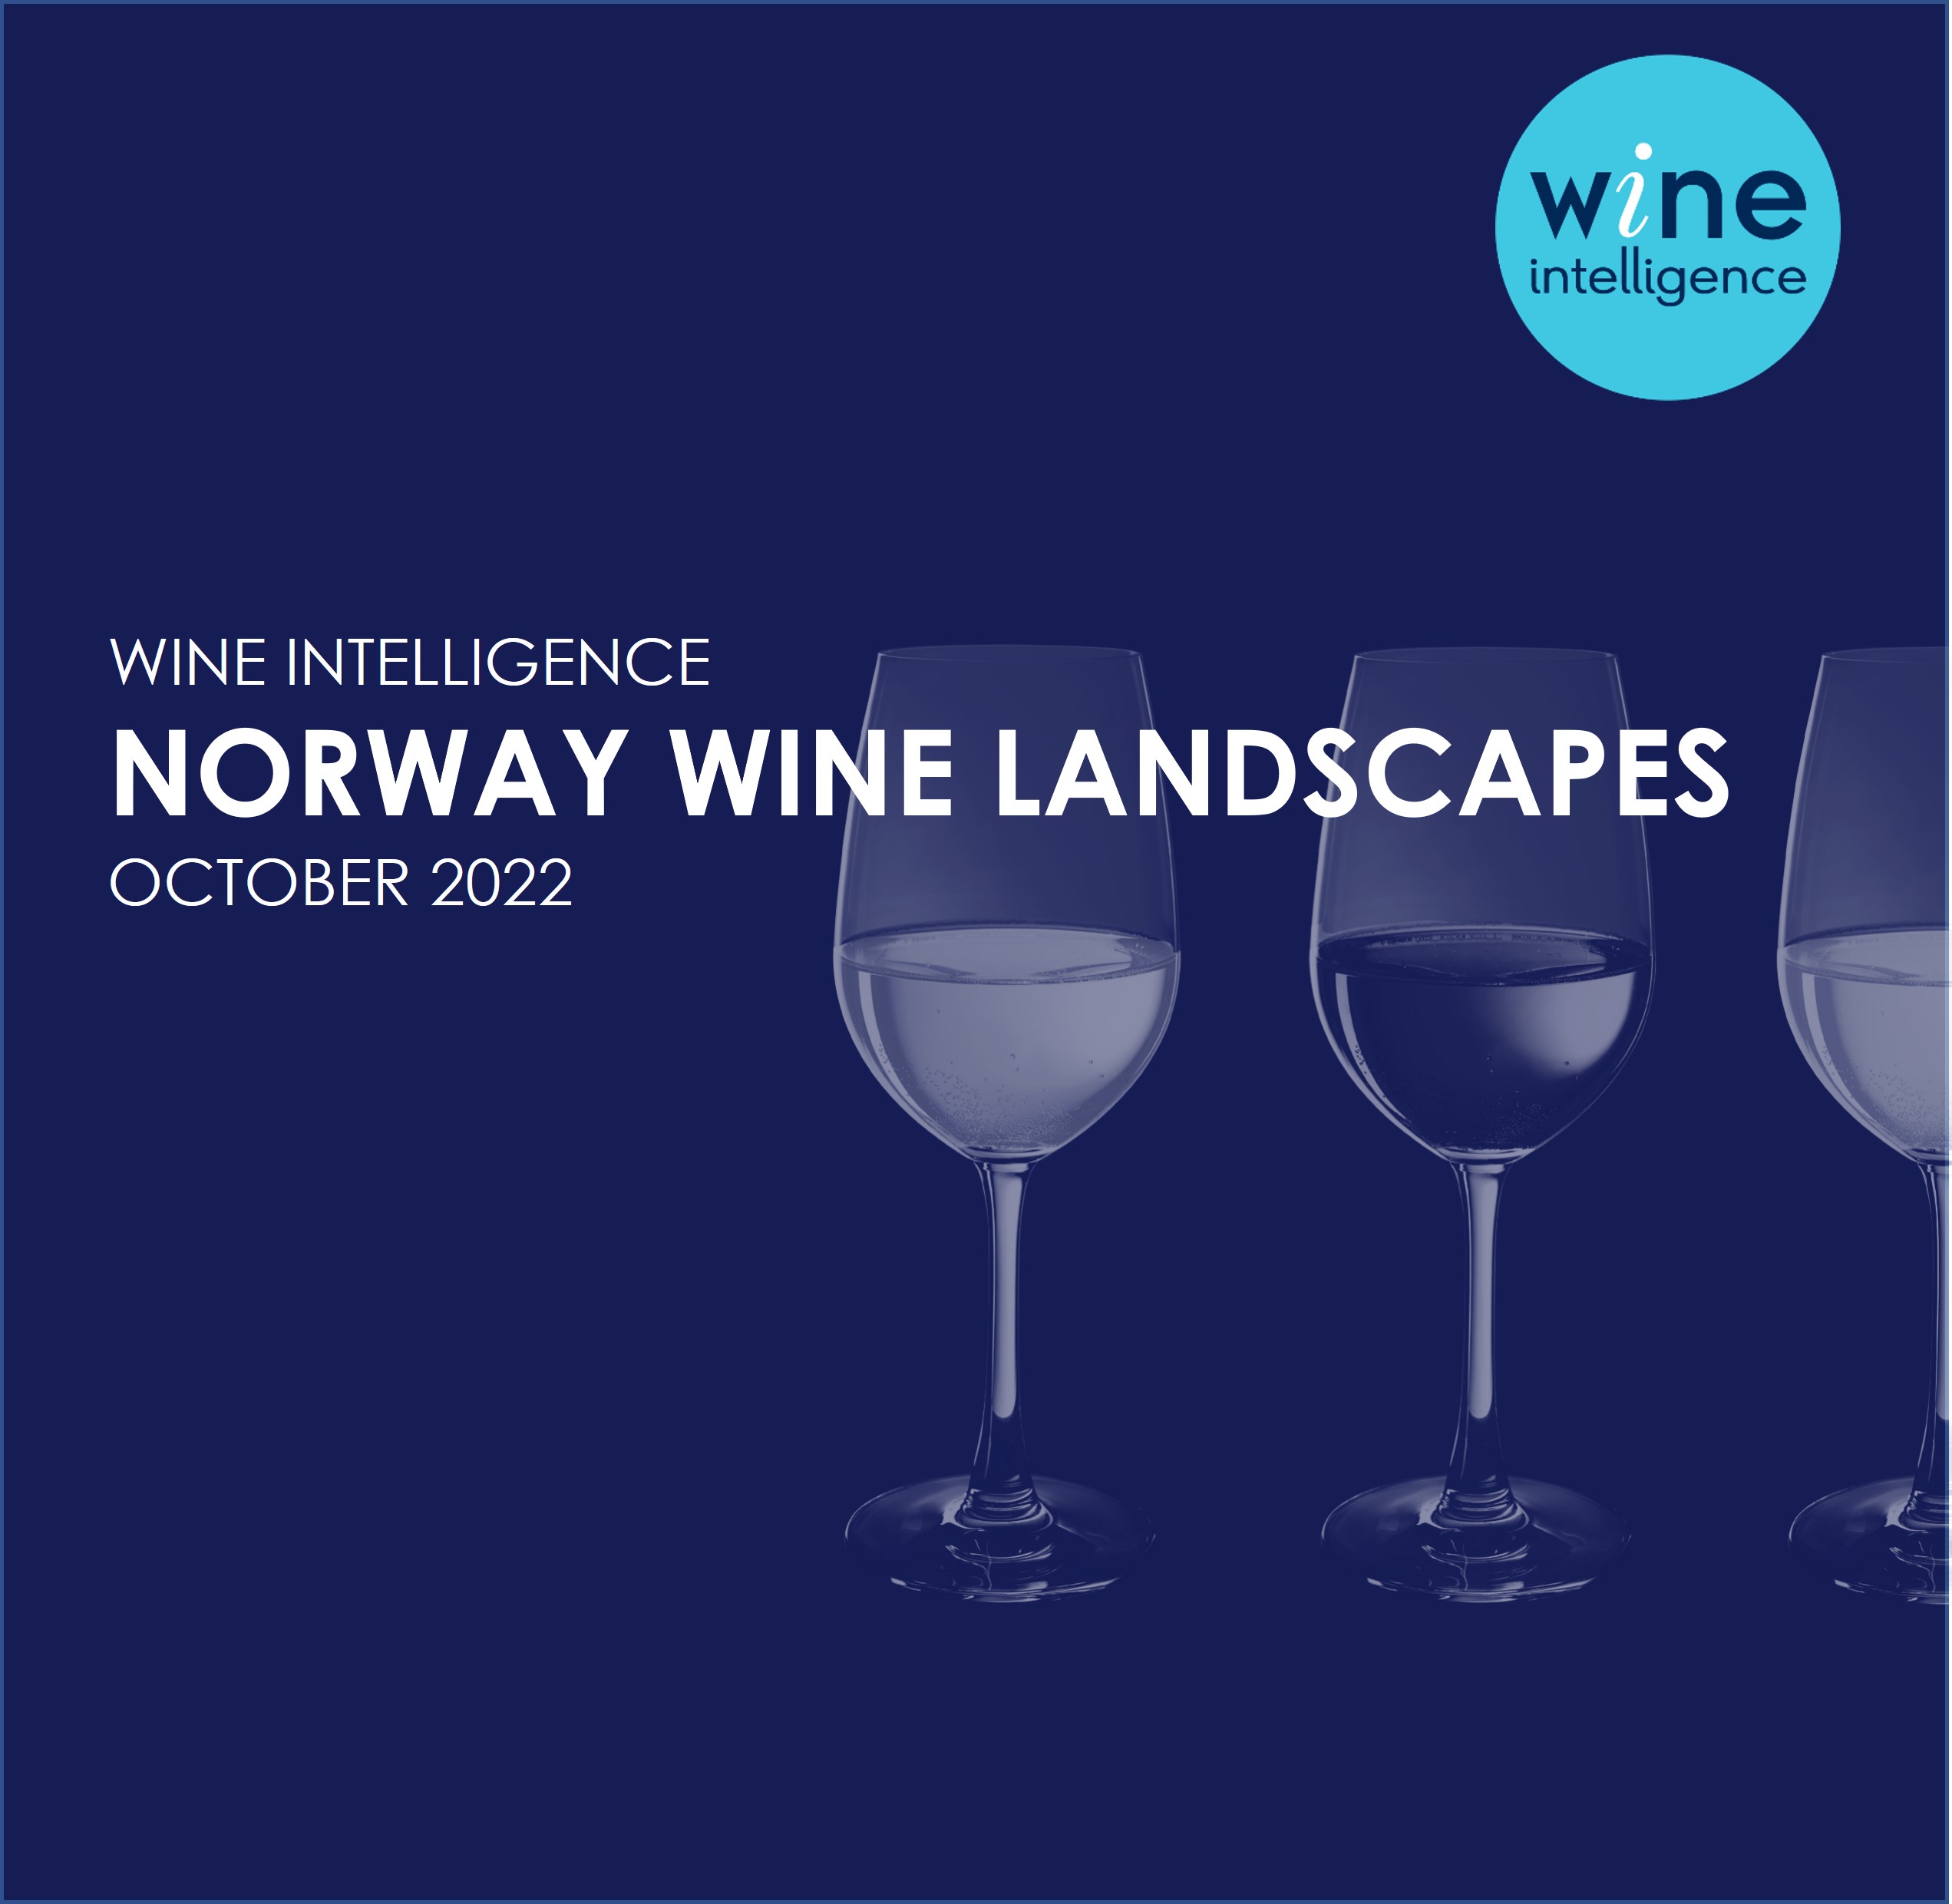 Norway wine landscapes report 2022 - Norway Wine Landscapes 2022